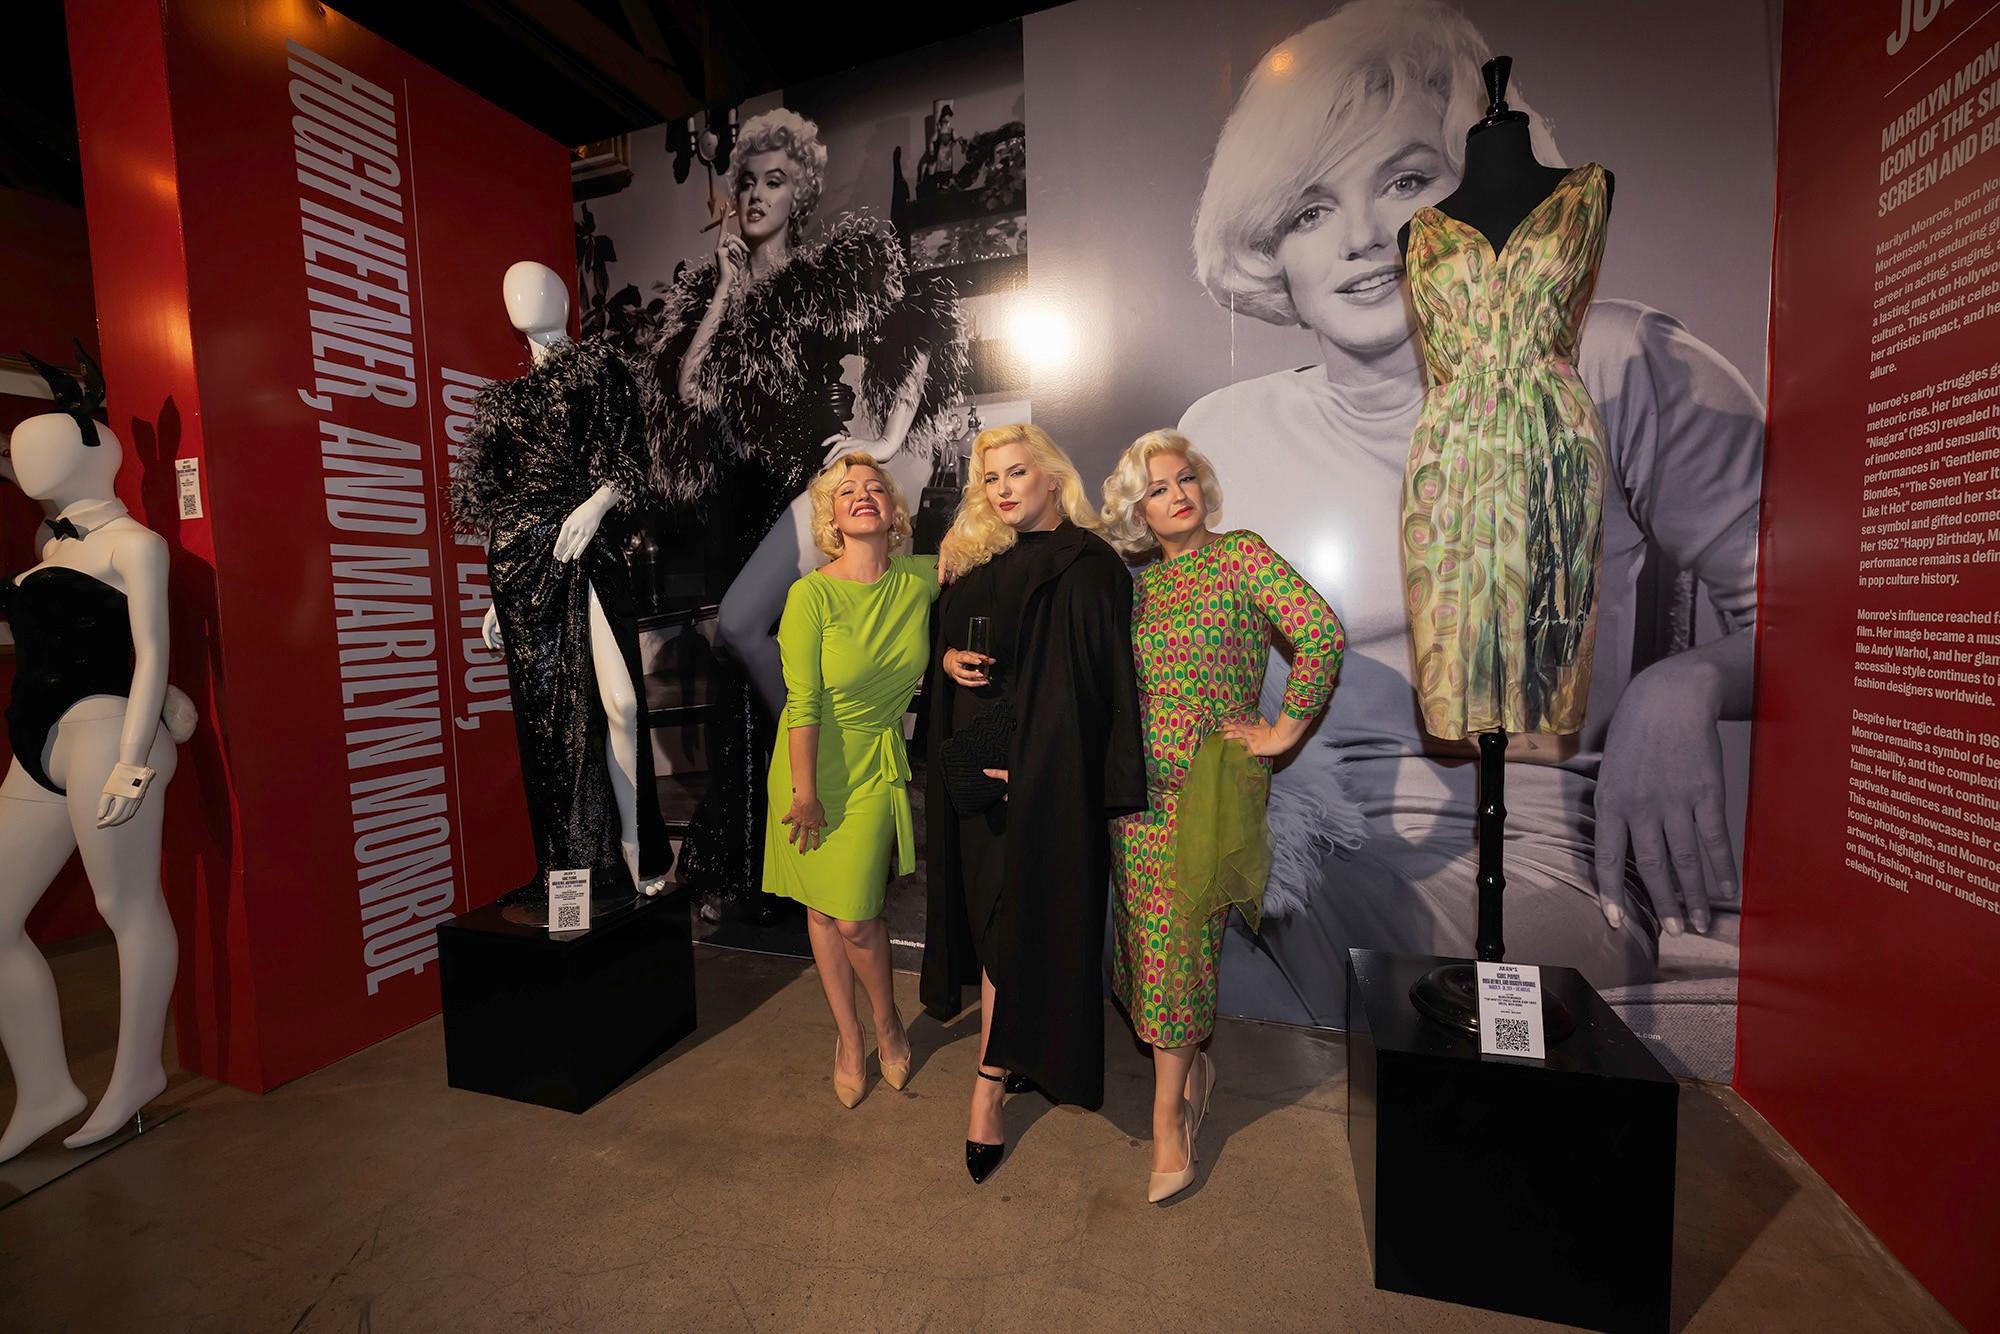 three blonde women are standing next to each other in front of a marilyn monroe poster .